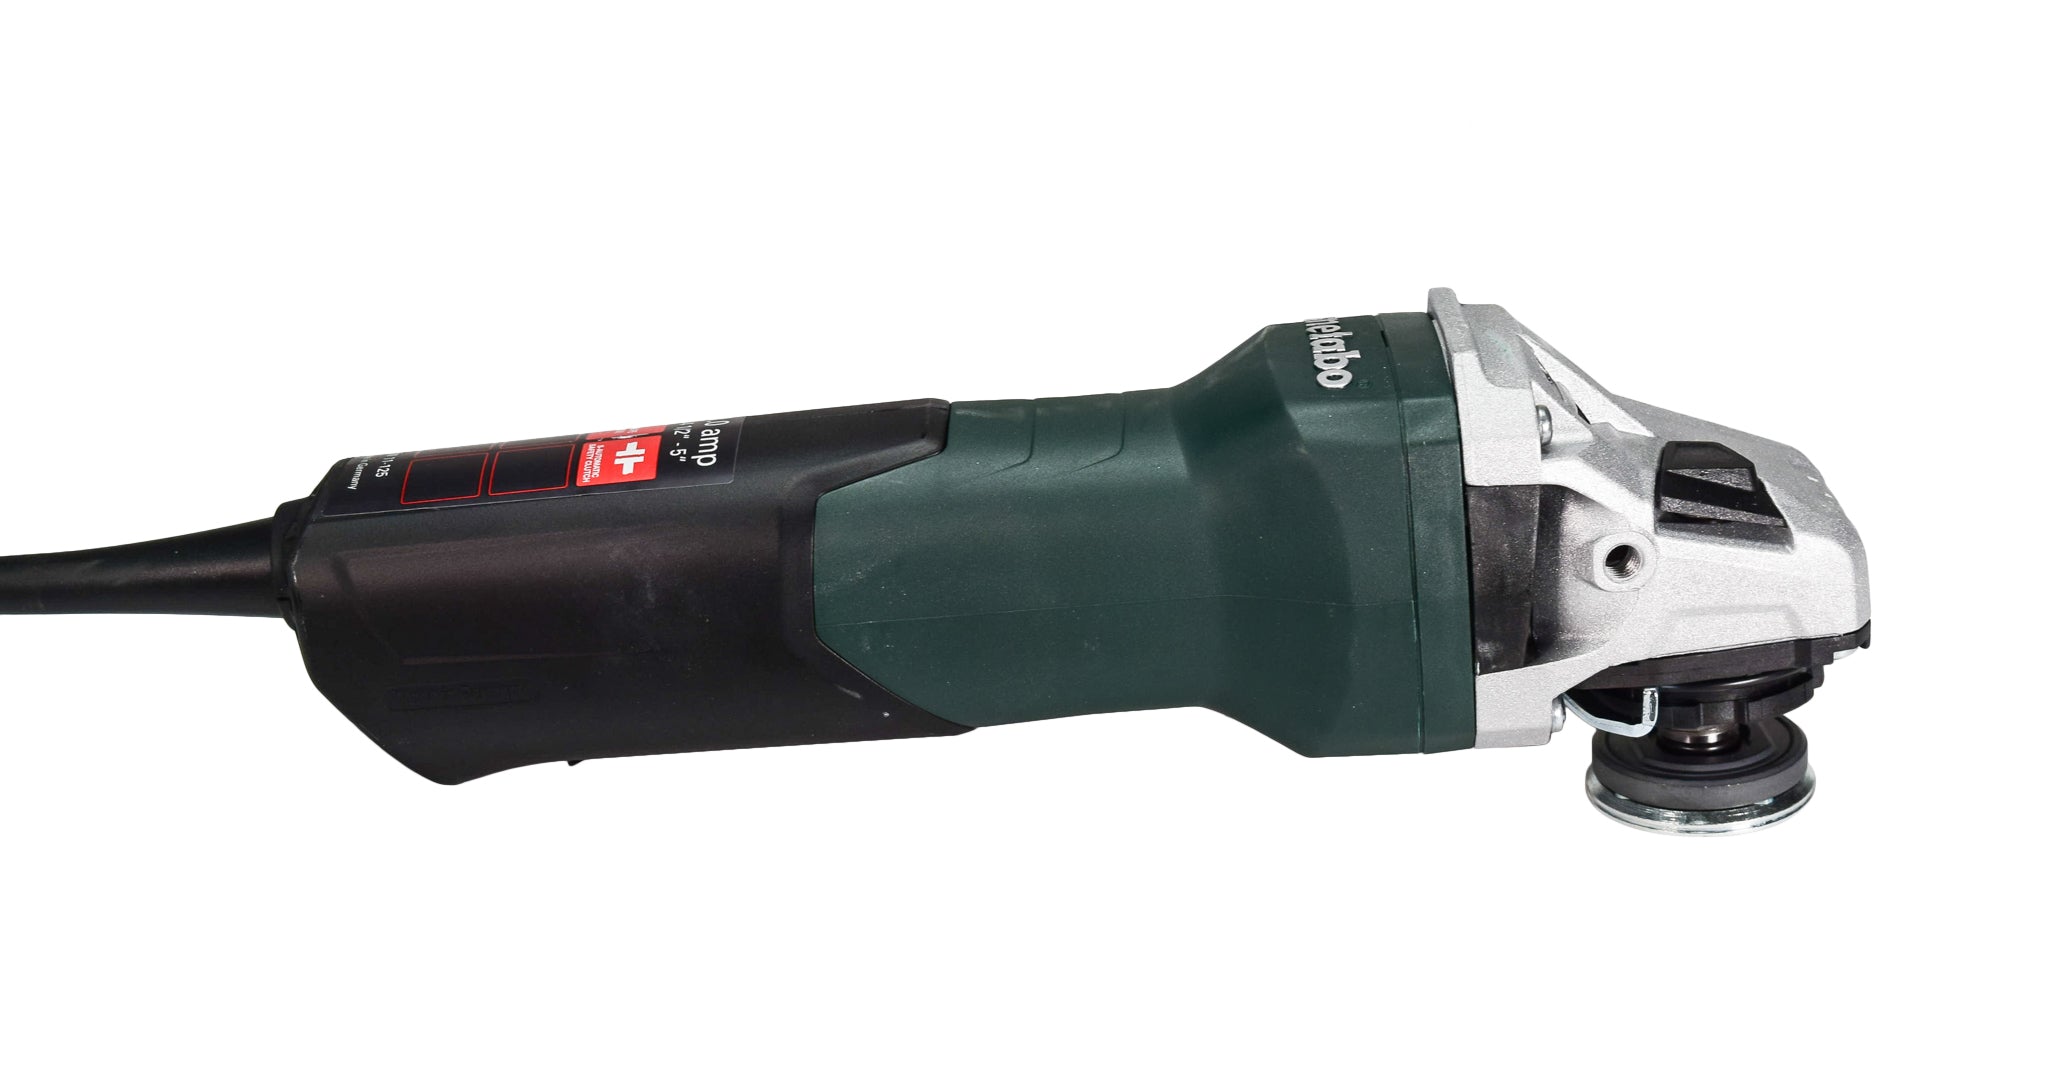 Metabo 603622850 W11-125 4-1/2 / 5” 11-Amp Corded Angle Grinder Set with Case